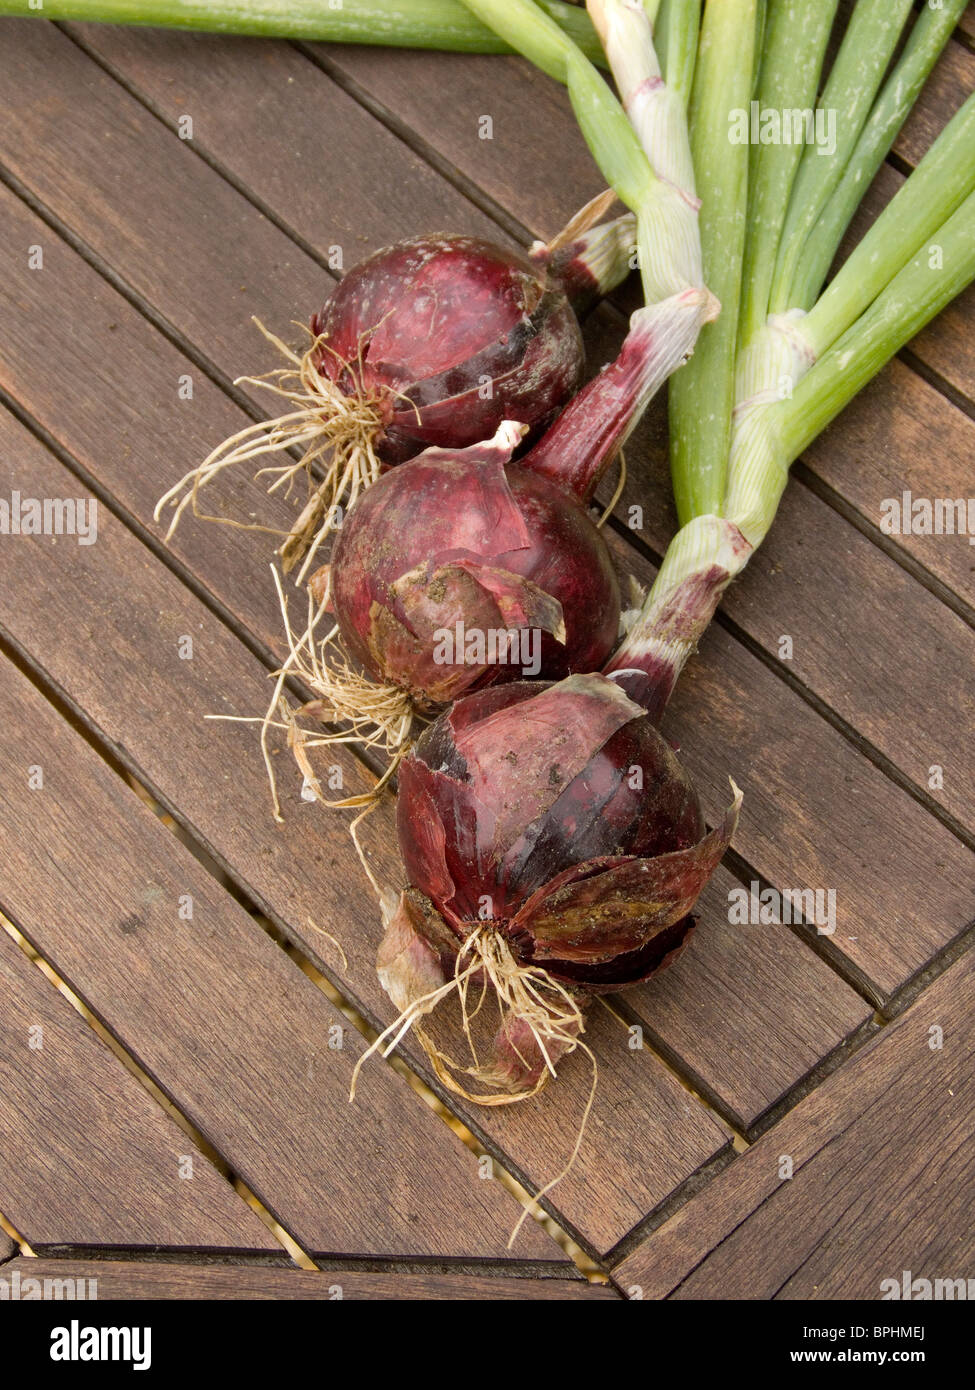 Home grown red onions just lifted and displayed on a wooden slatted garden table, onions with roots and stems Stock Photo